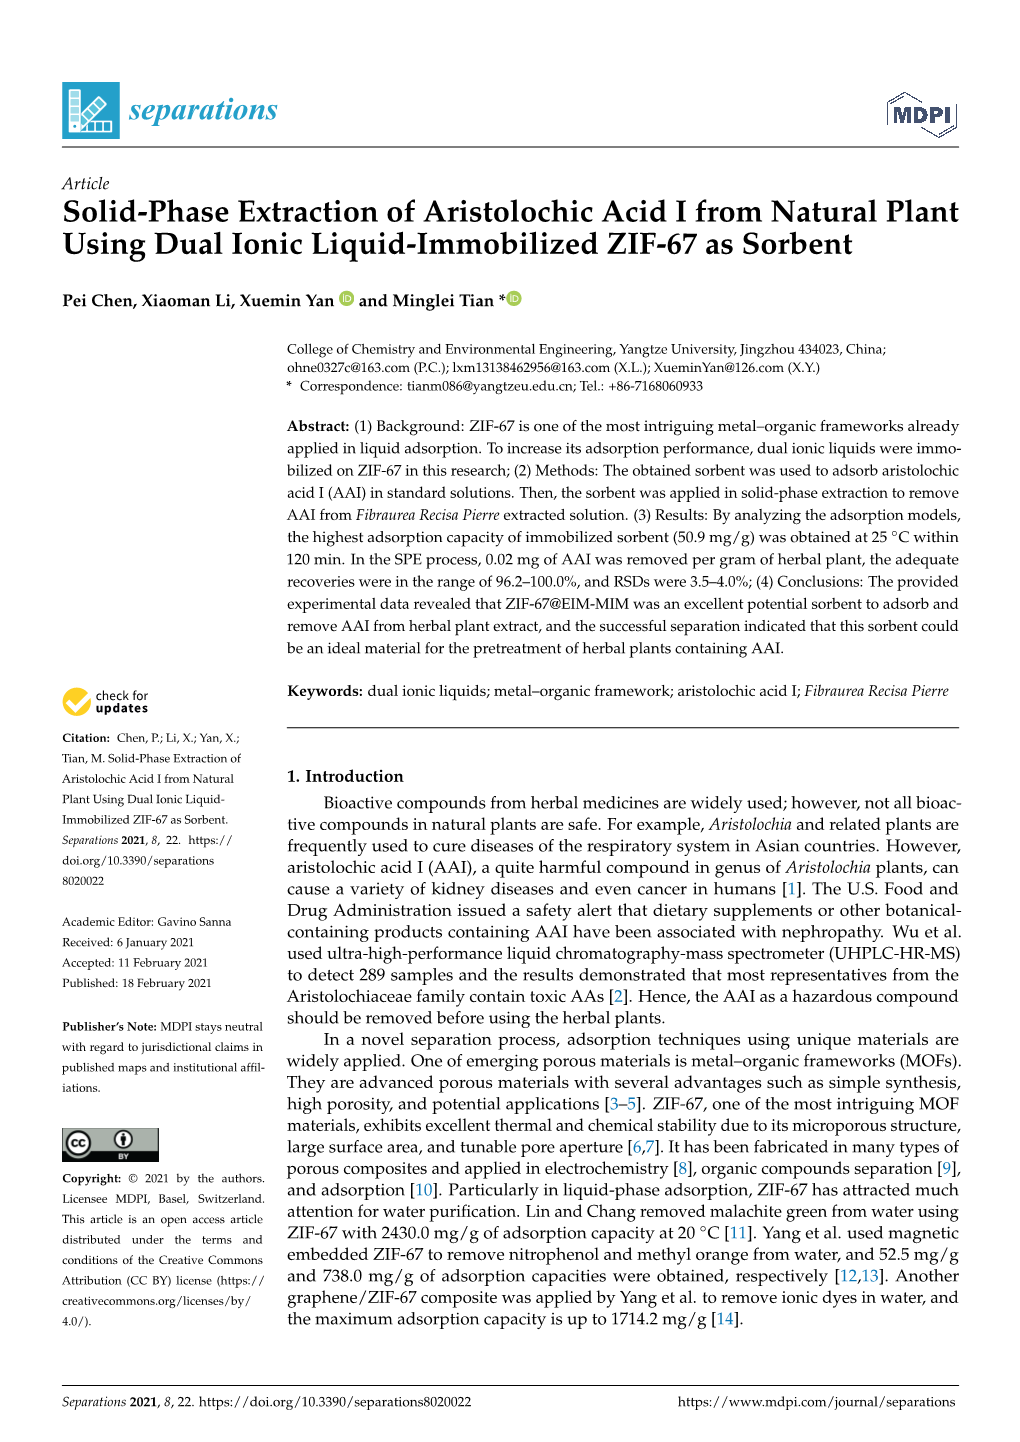 Solid-Phase Extraction of Aristolochic Acid I from Natural Plant Using Dual Ionic Liquid-Immobilized ZIF-67 As Sorbent